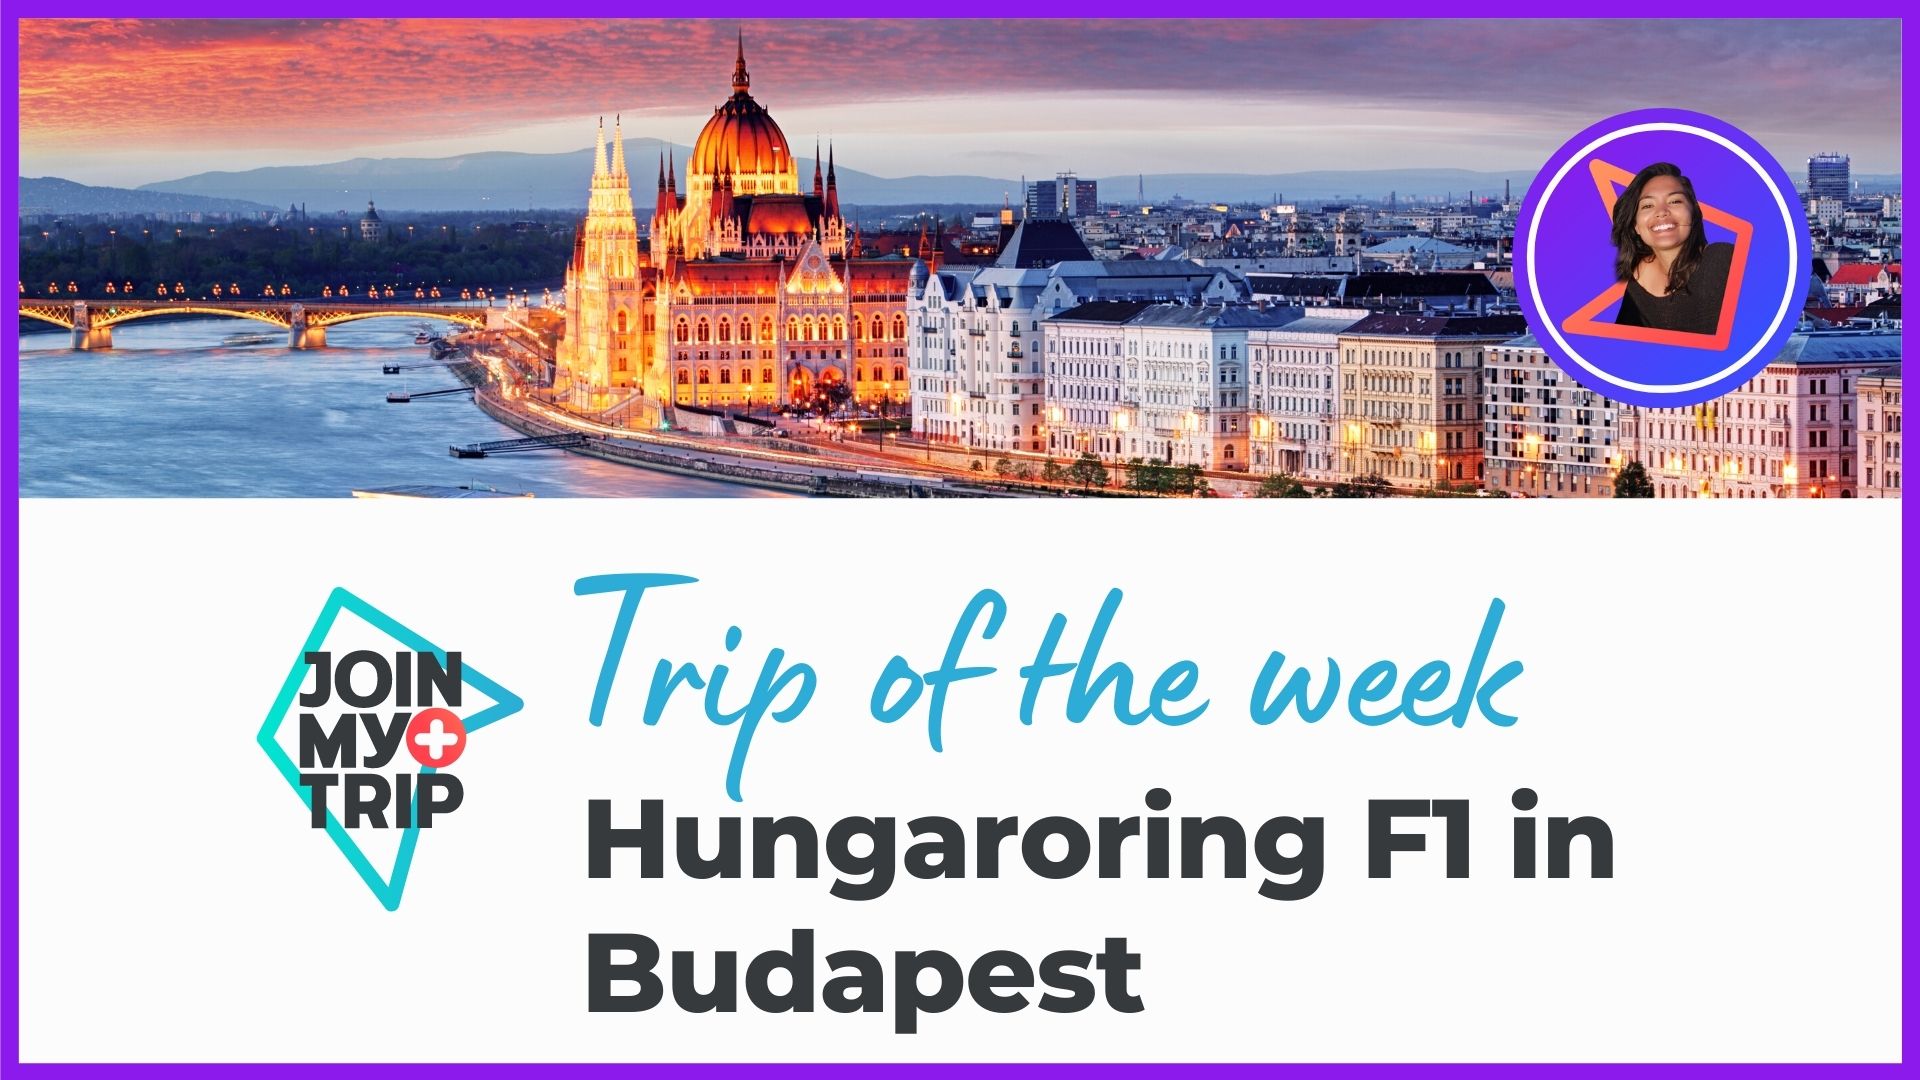 Hungaroring F1 in Budapest | Trip of the Week